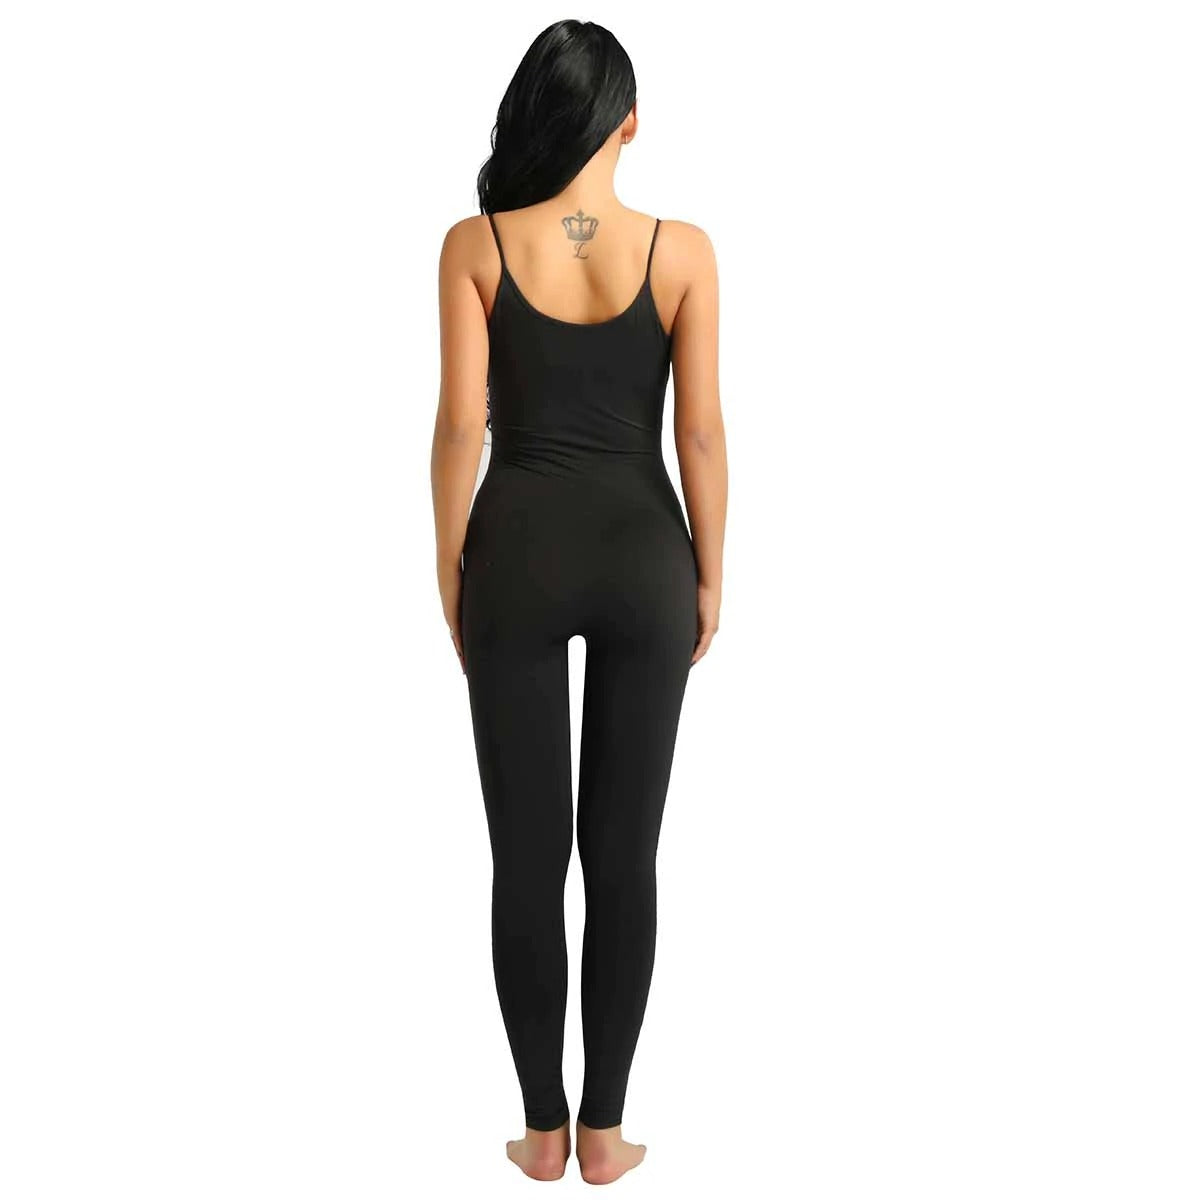 Women Adult One-piece Spaghetti Strapped Footless Stretchy Solid Jumpsuit - HARD'N'HEAVY